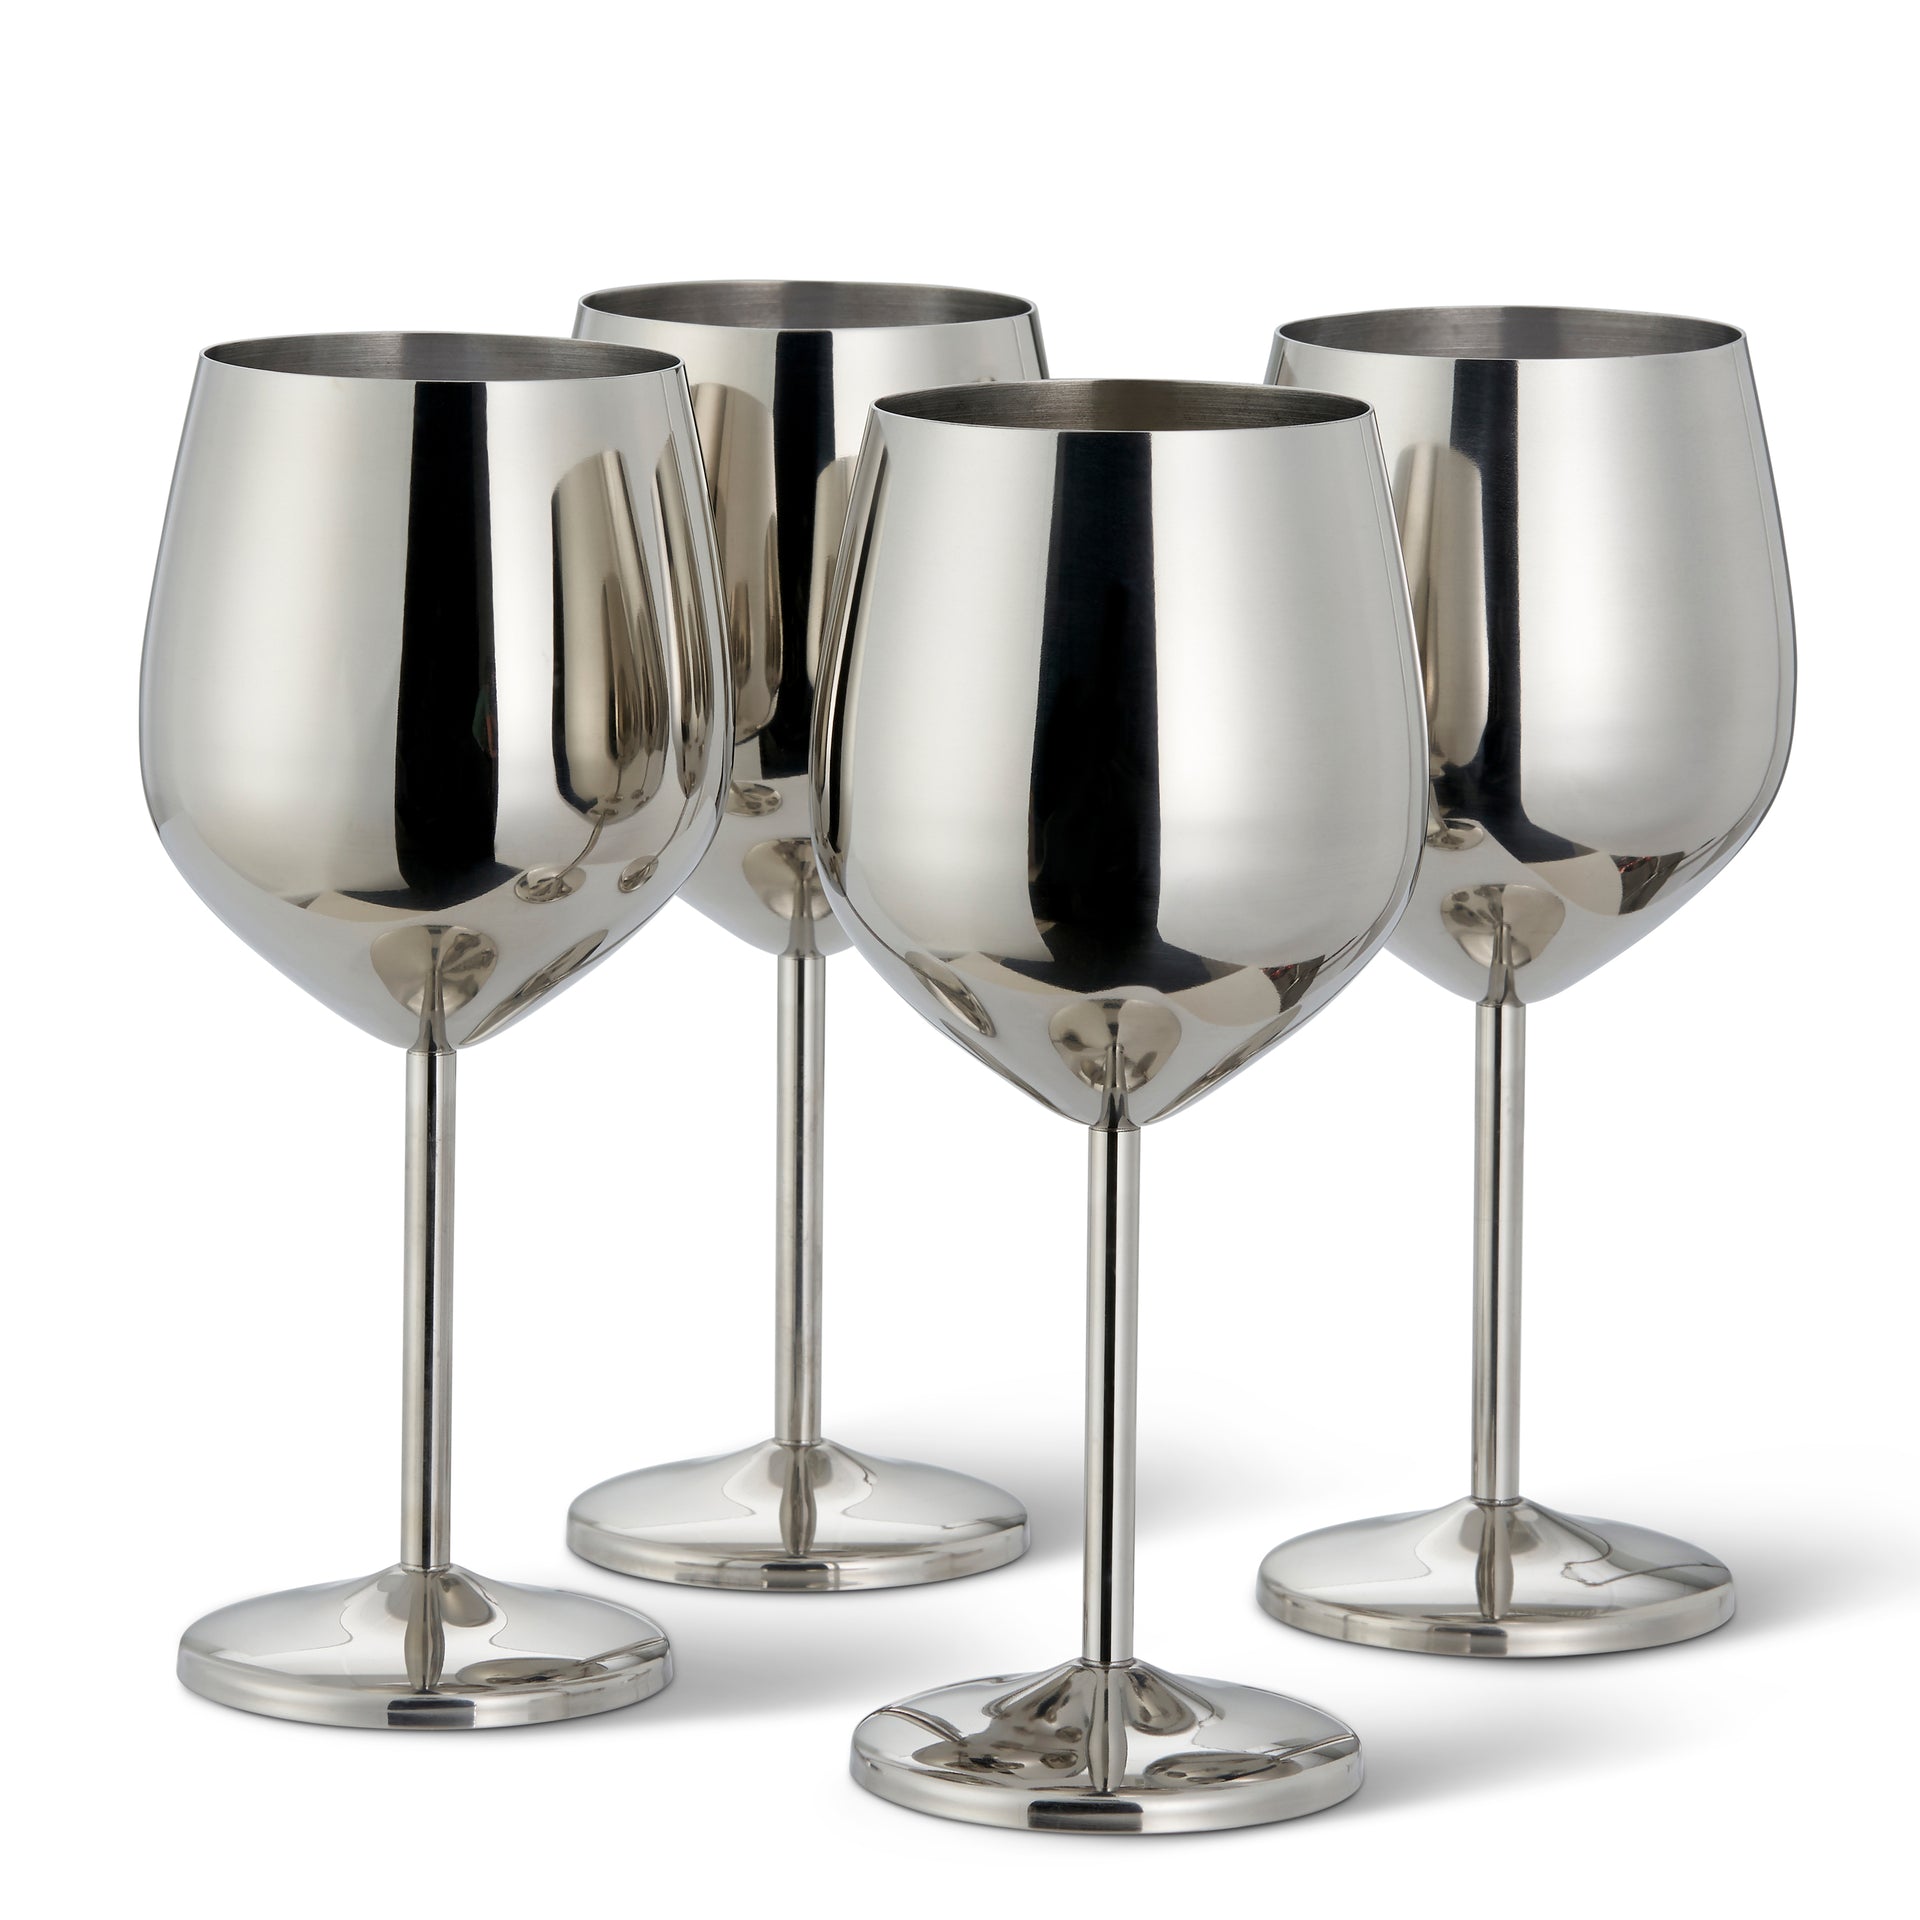 ARORA Stainless Steel Wine Glass 18oz - Set of 4 Matte Silver - 3.6 D x  8.3 H, Large (851005)